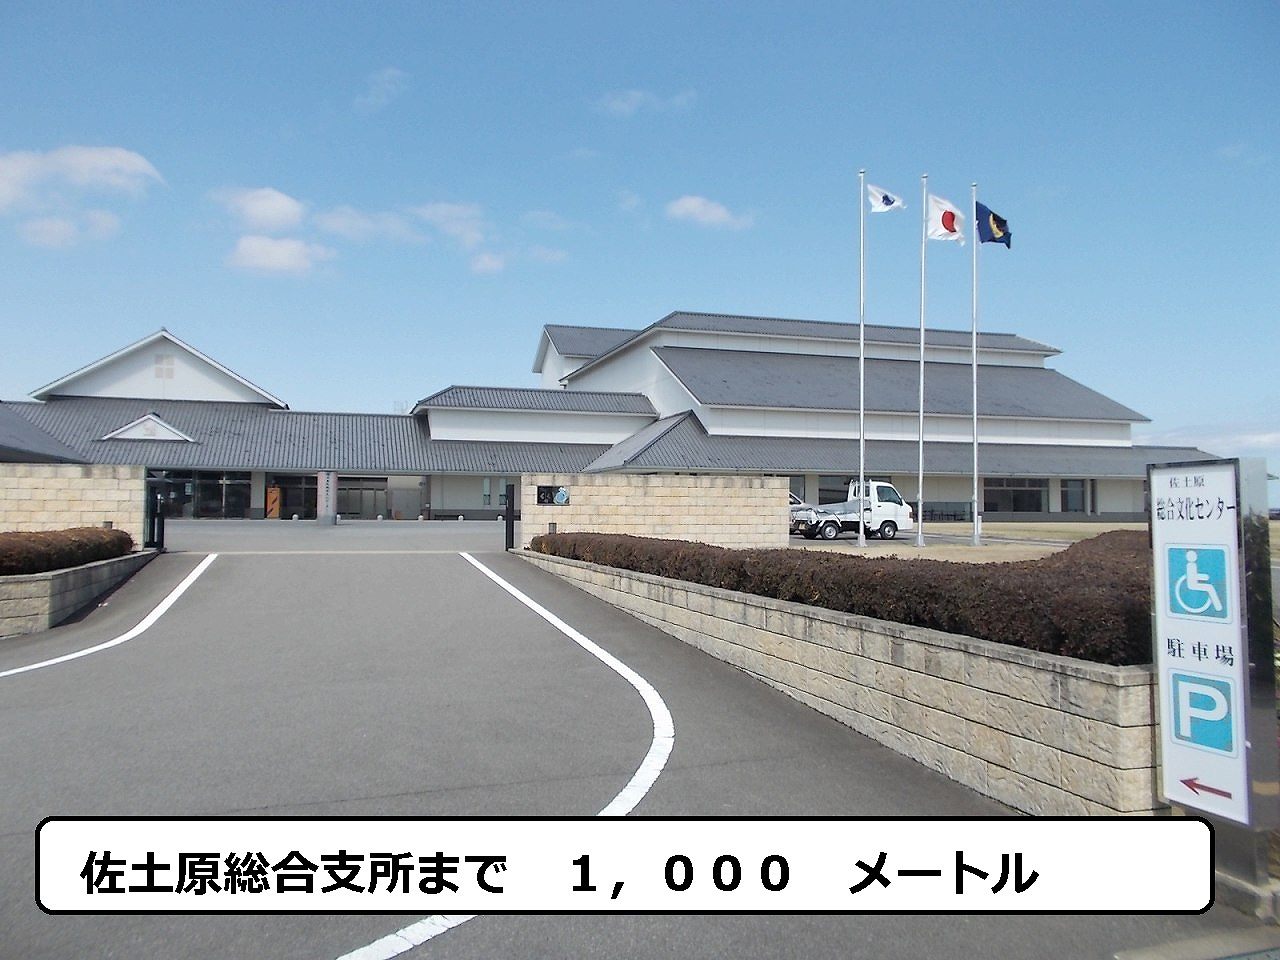 Government office. Sadowara 1000m until the general branch office (government office)